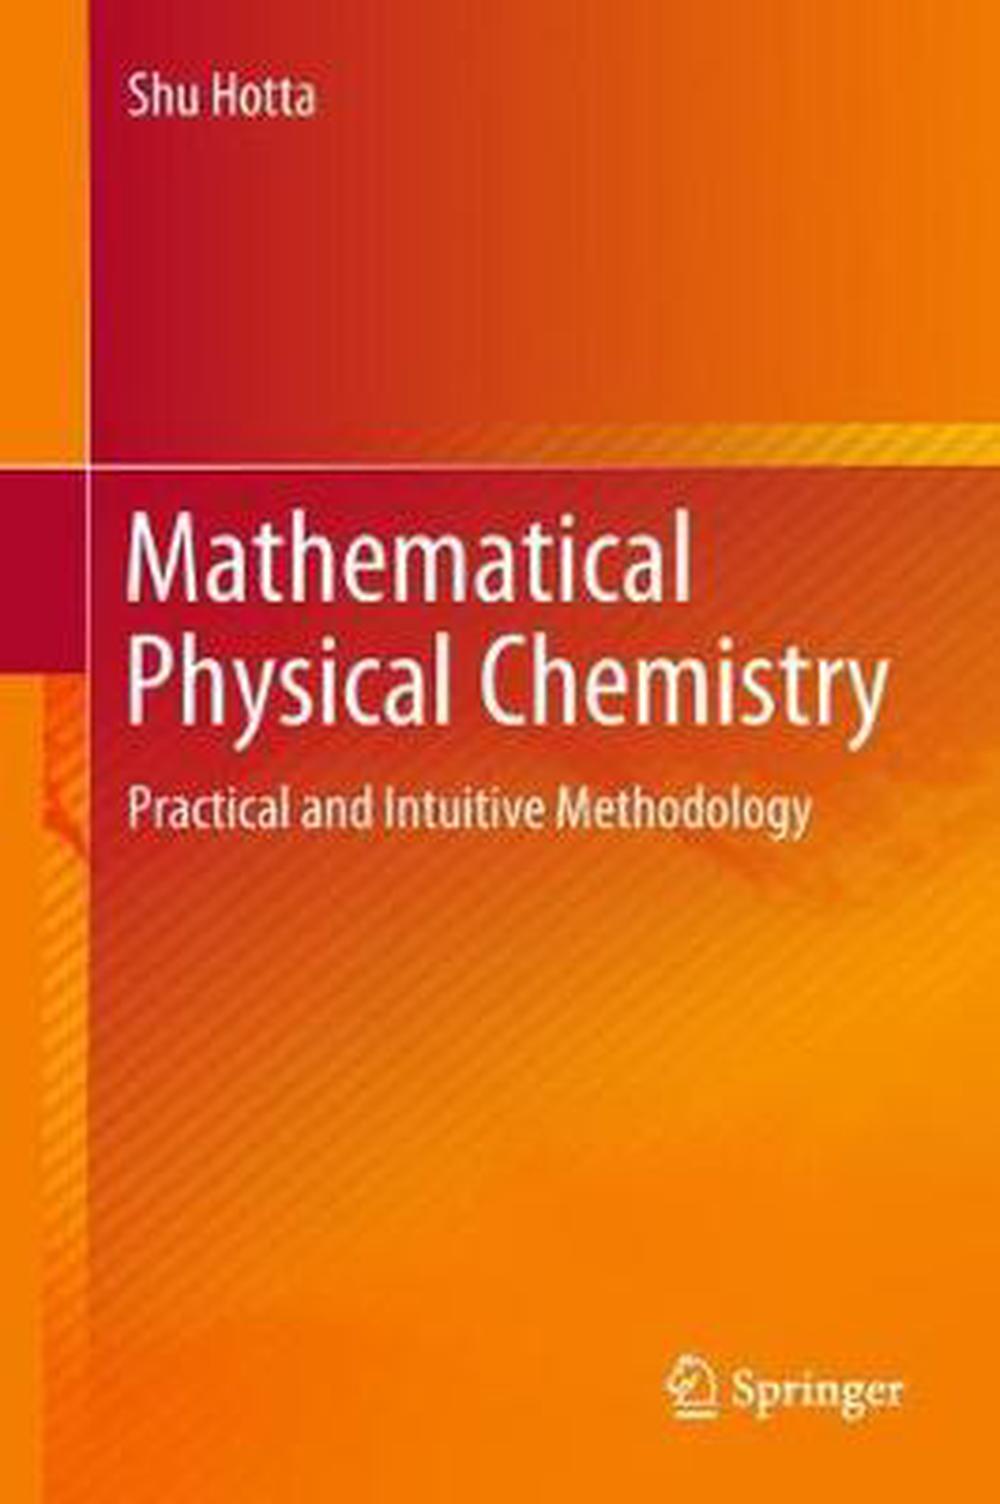 Mathematical Physical Chemistry by Shu Hotta, Hardcover, 9789811076701 ...